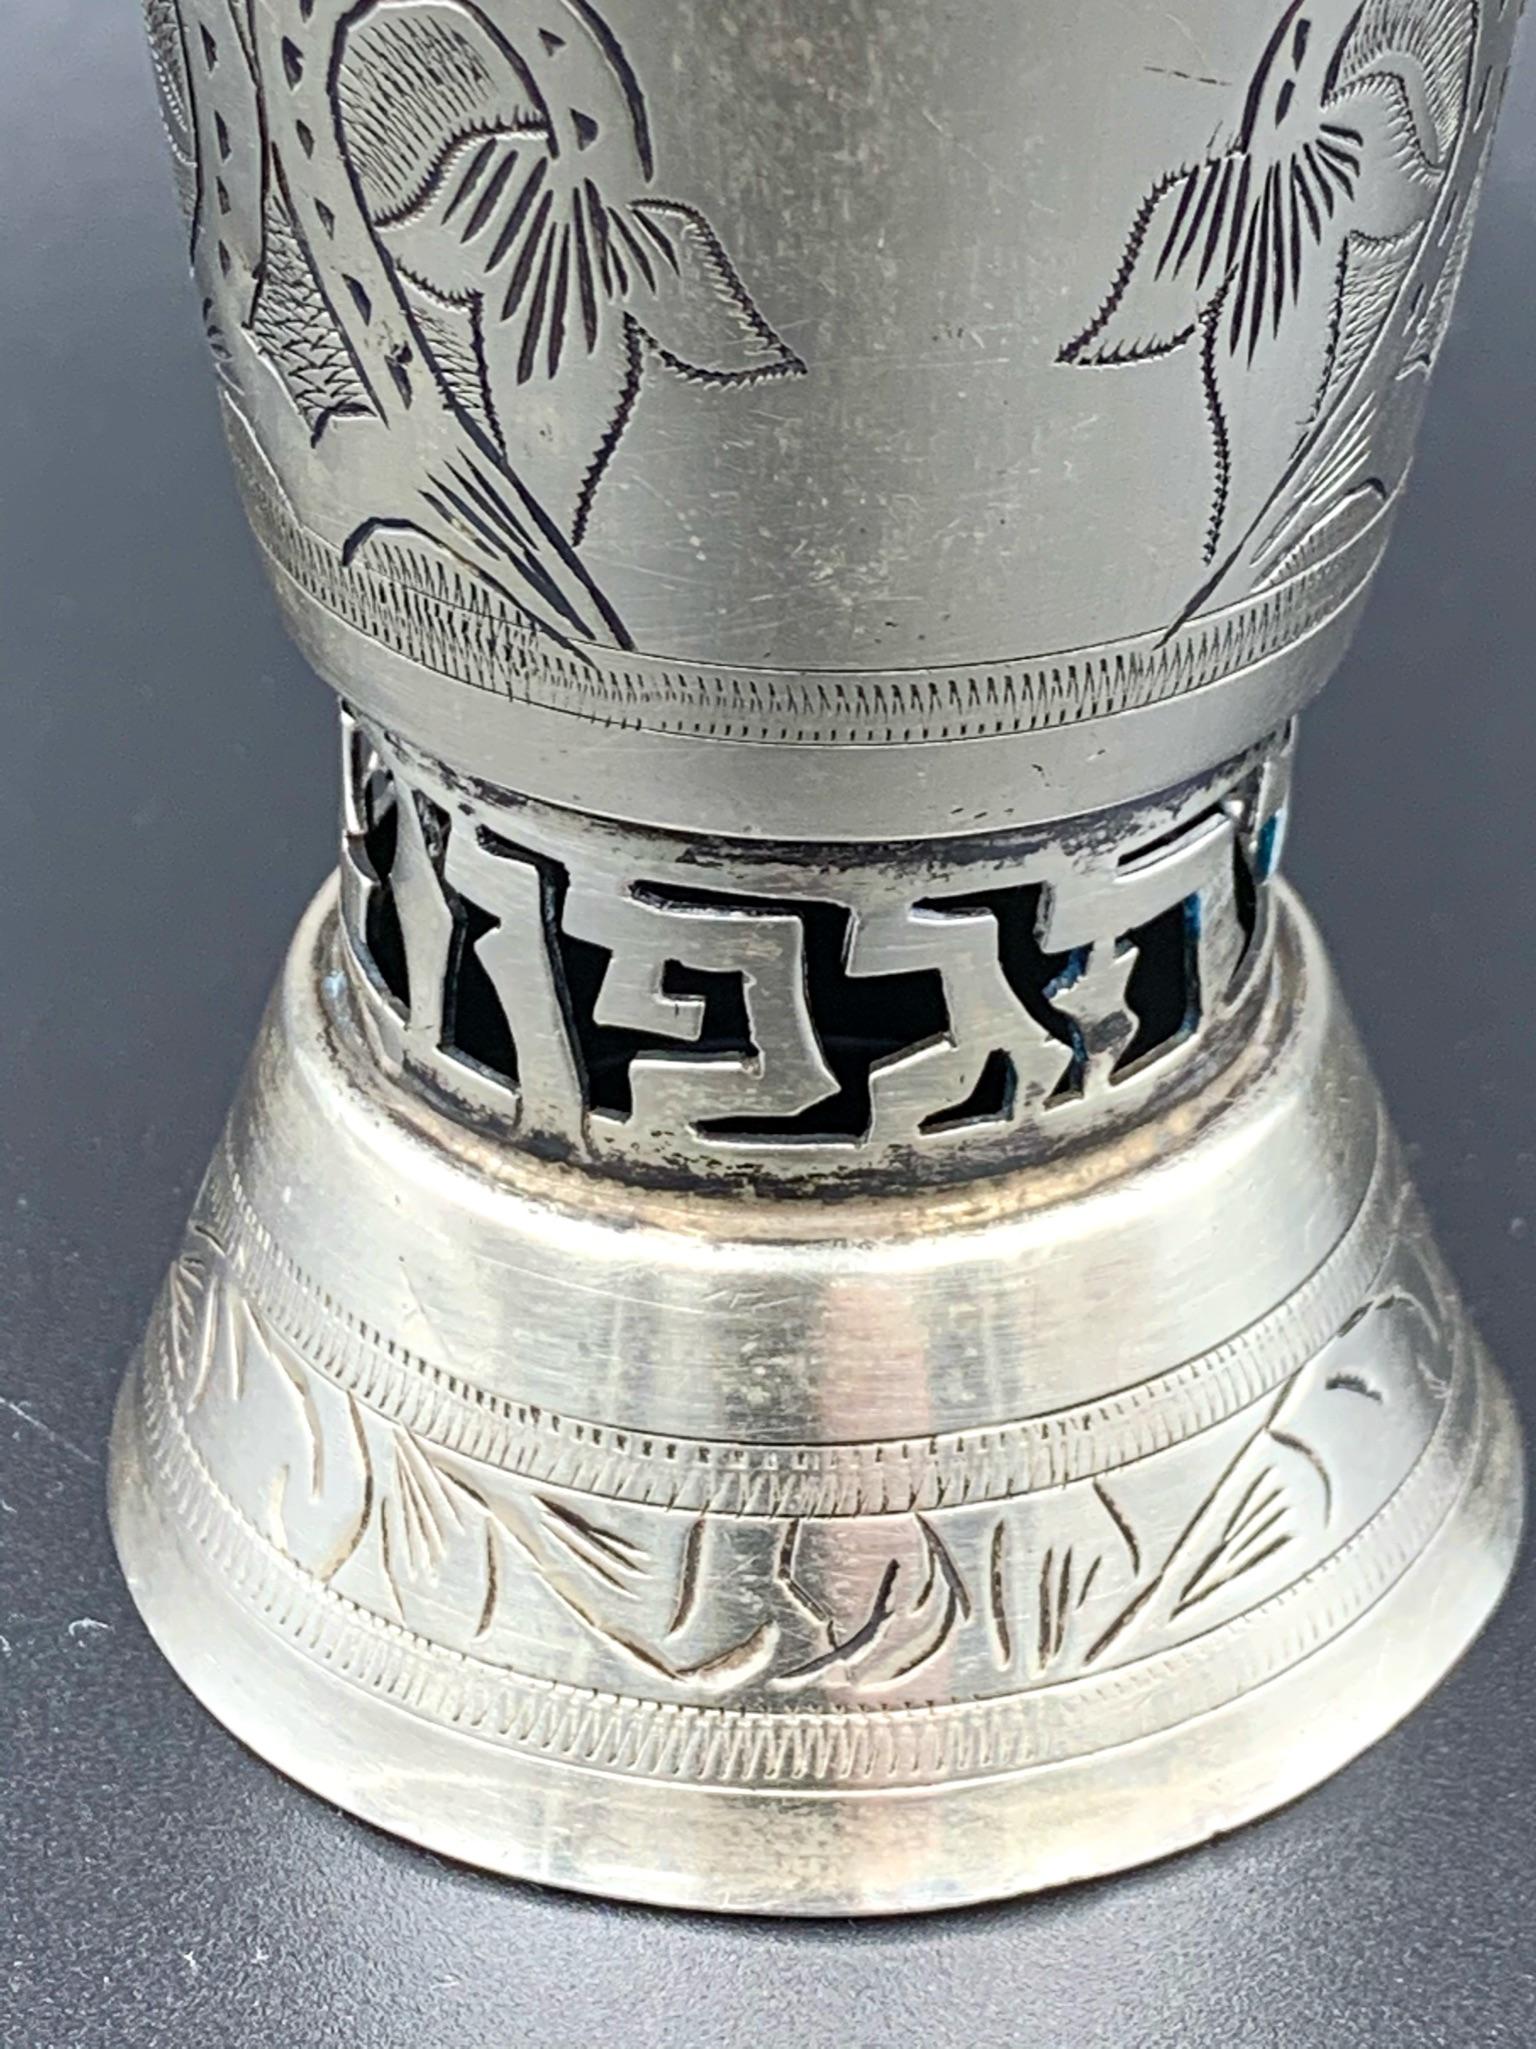 Handmade sterling silver marked Kiddush cup featuring an engraved design and cut out hebrew letters at bottom. It is 4.62